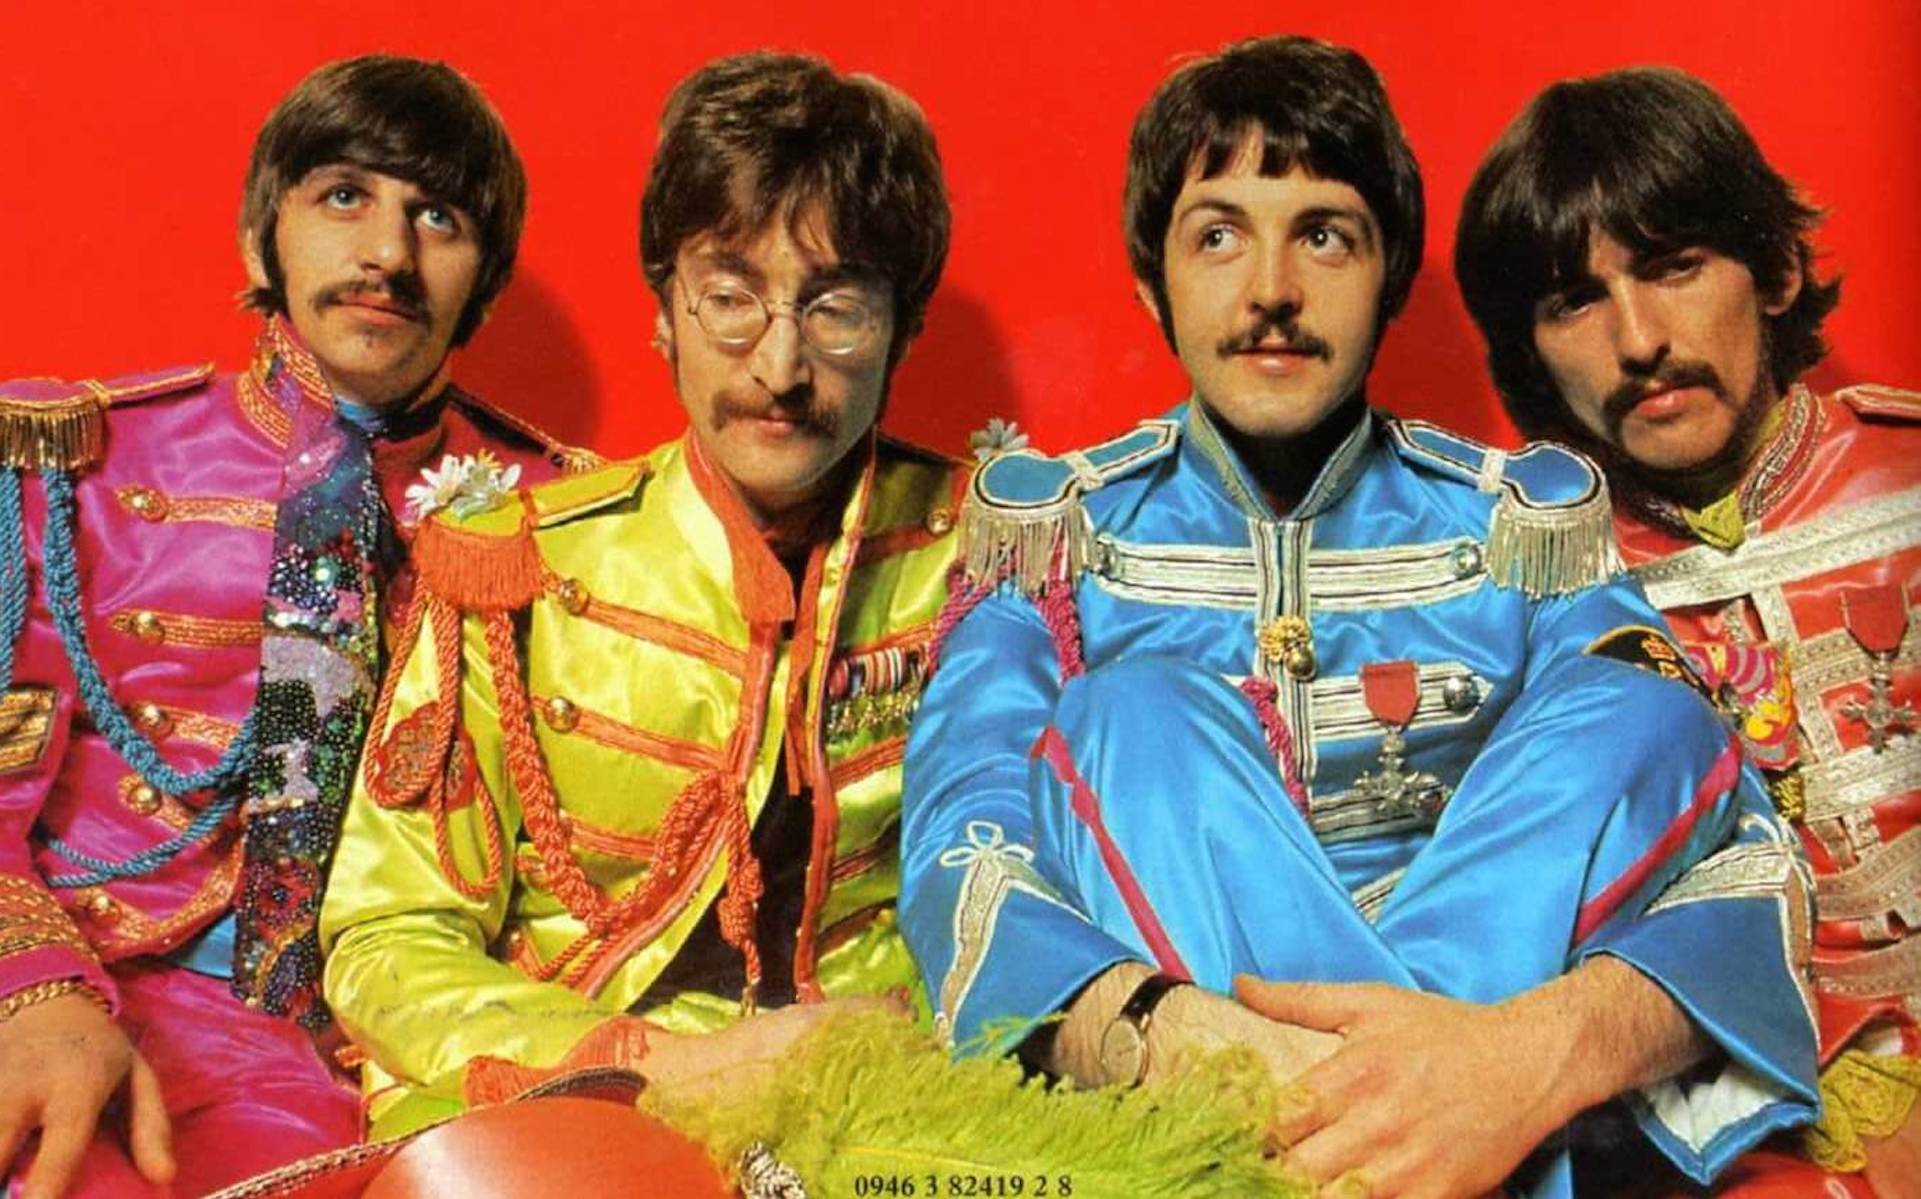 Beatles sgt peppers lonely hearts club. Битлз сержант Пеппер. Sgt Pepper's Lonely Hearts Club Band. Sgt. Pepper s Lonely Hearts Club Band the Beatles. The Beatles 1967.